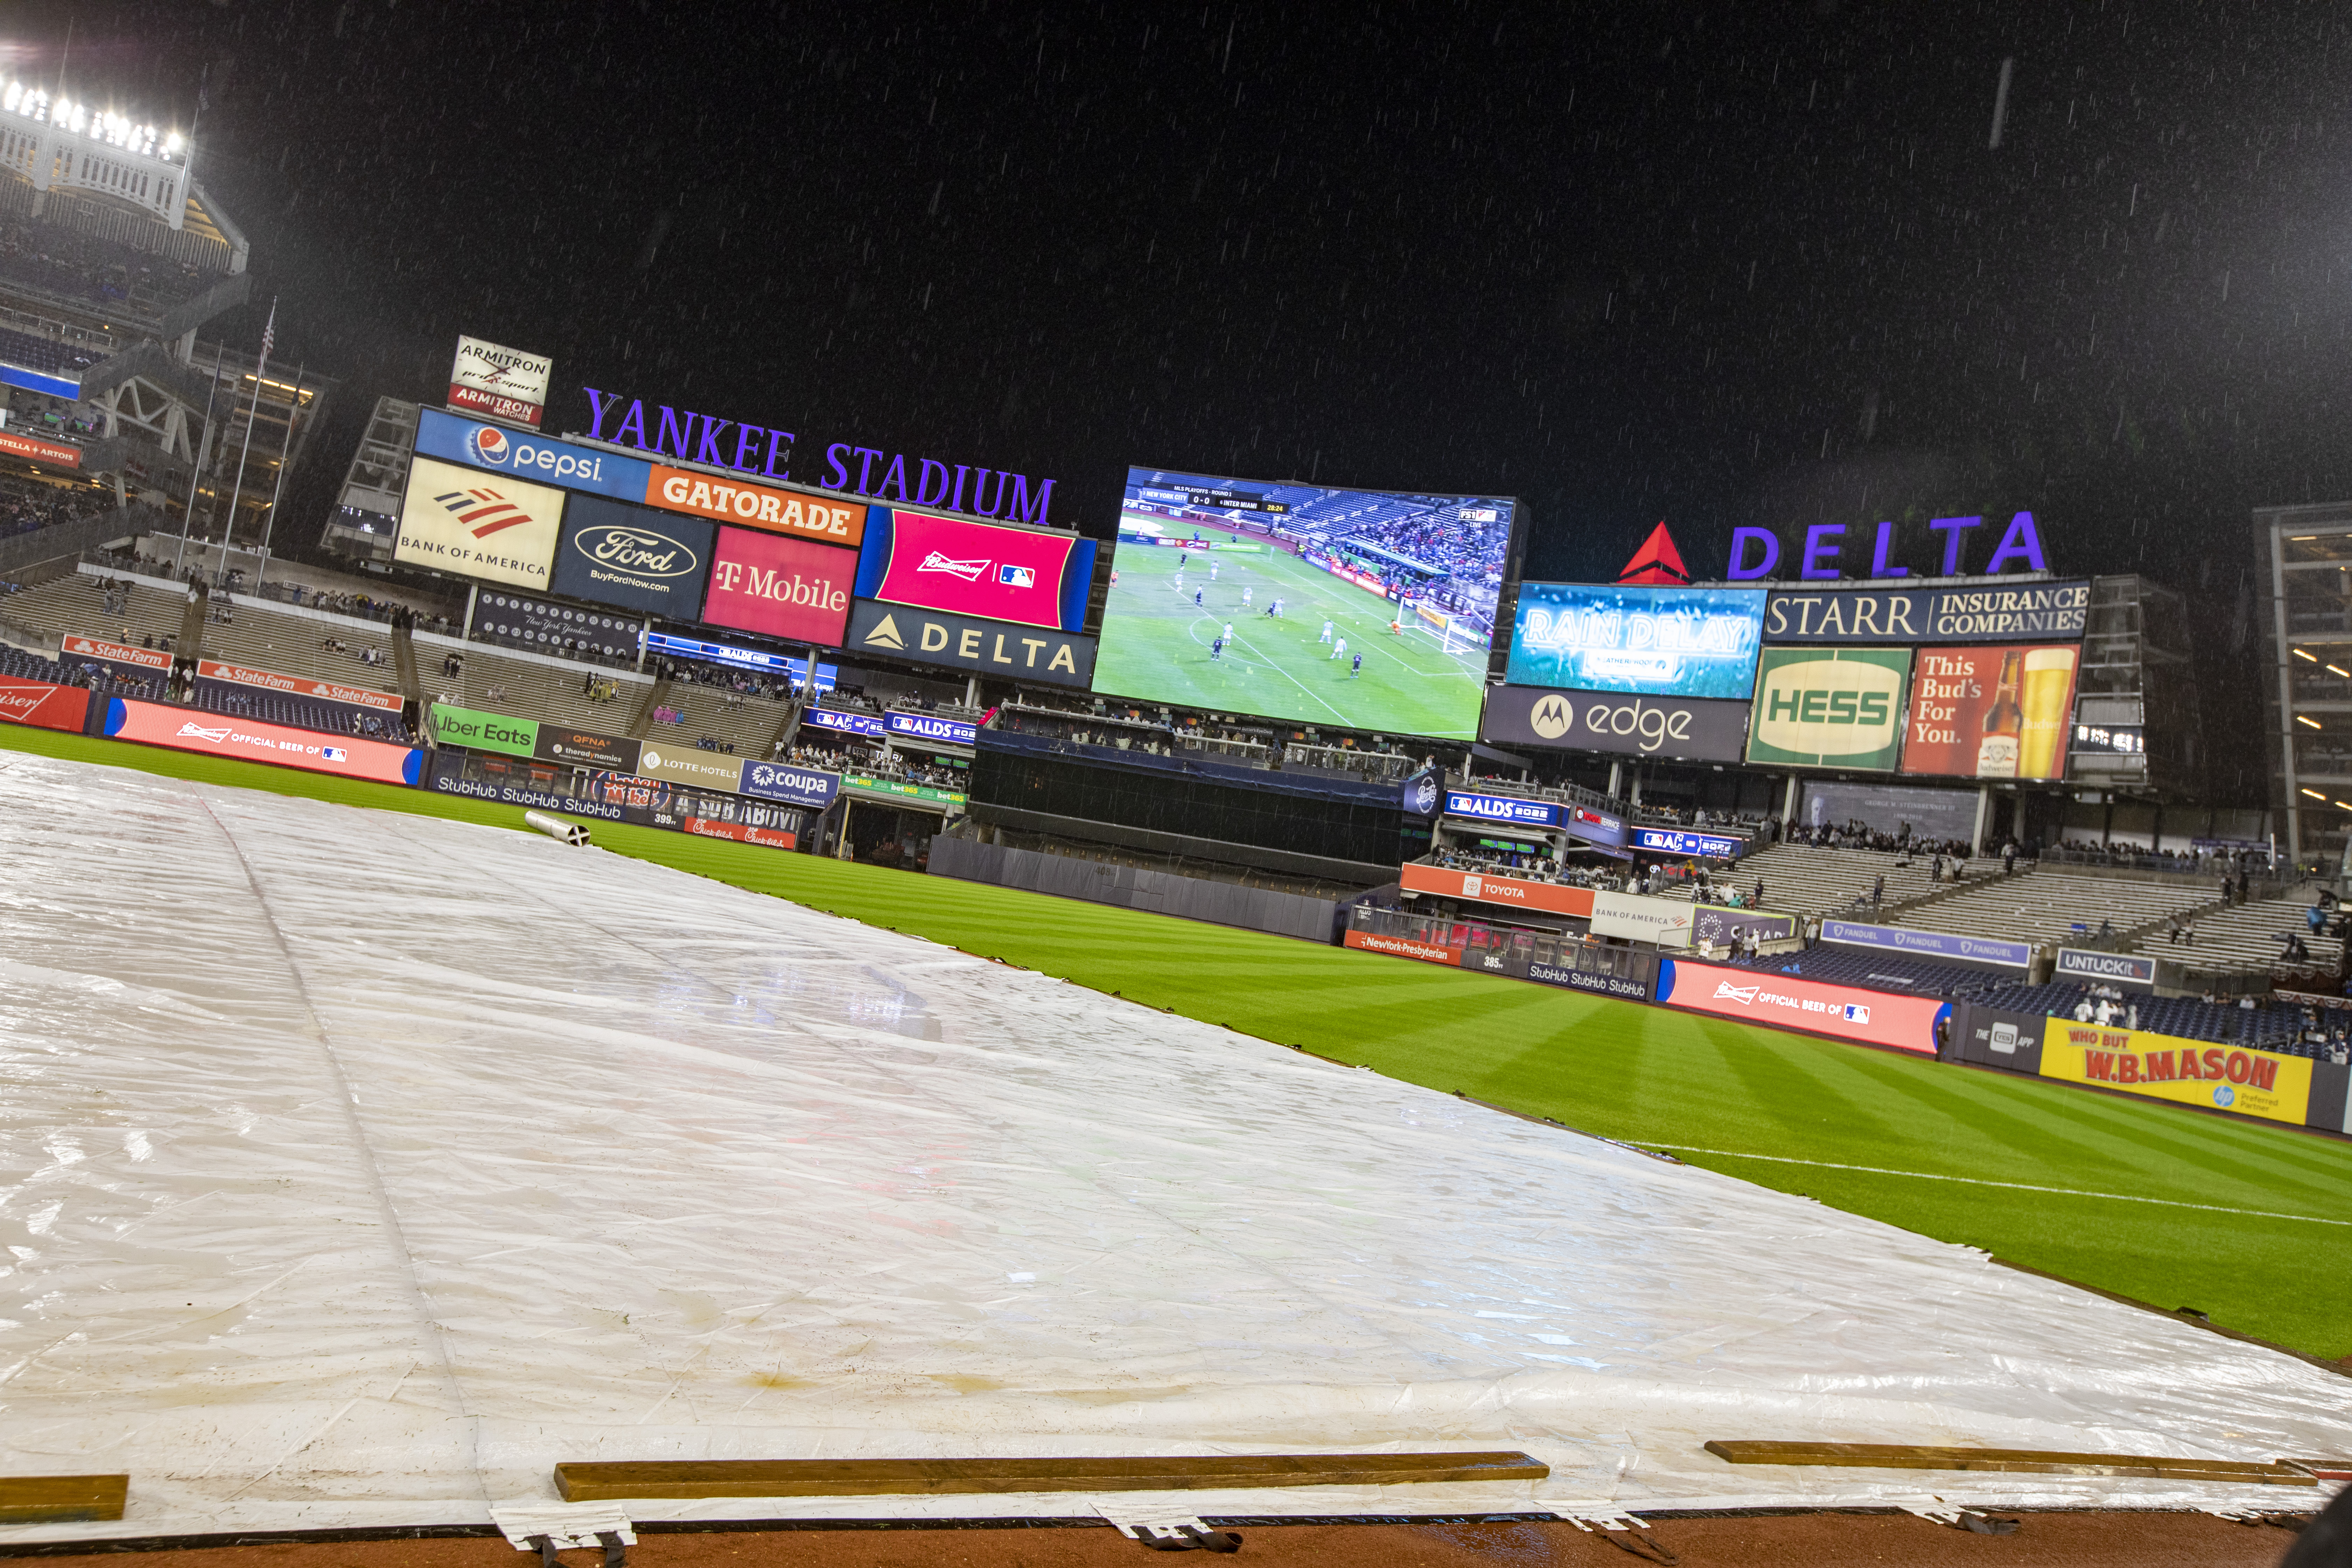 Yankees blitz Rays after rain delay, extend AL East lead to 5 1/2